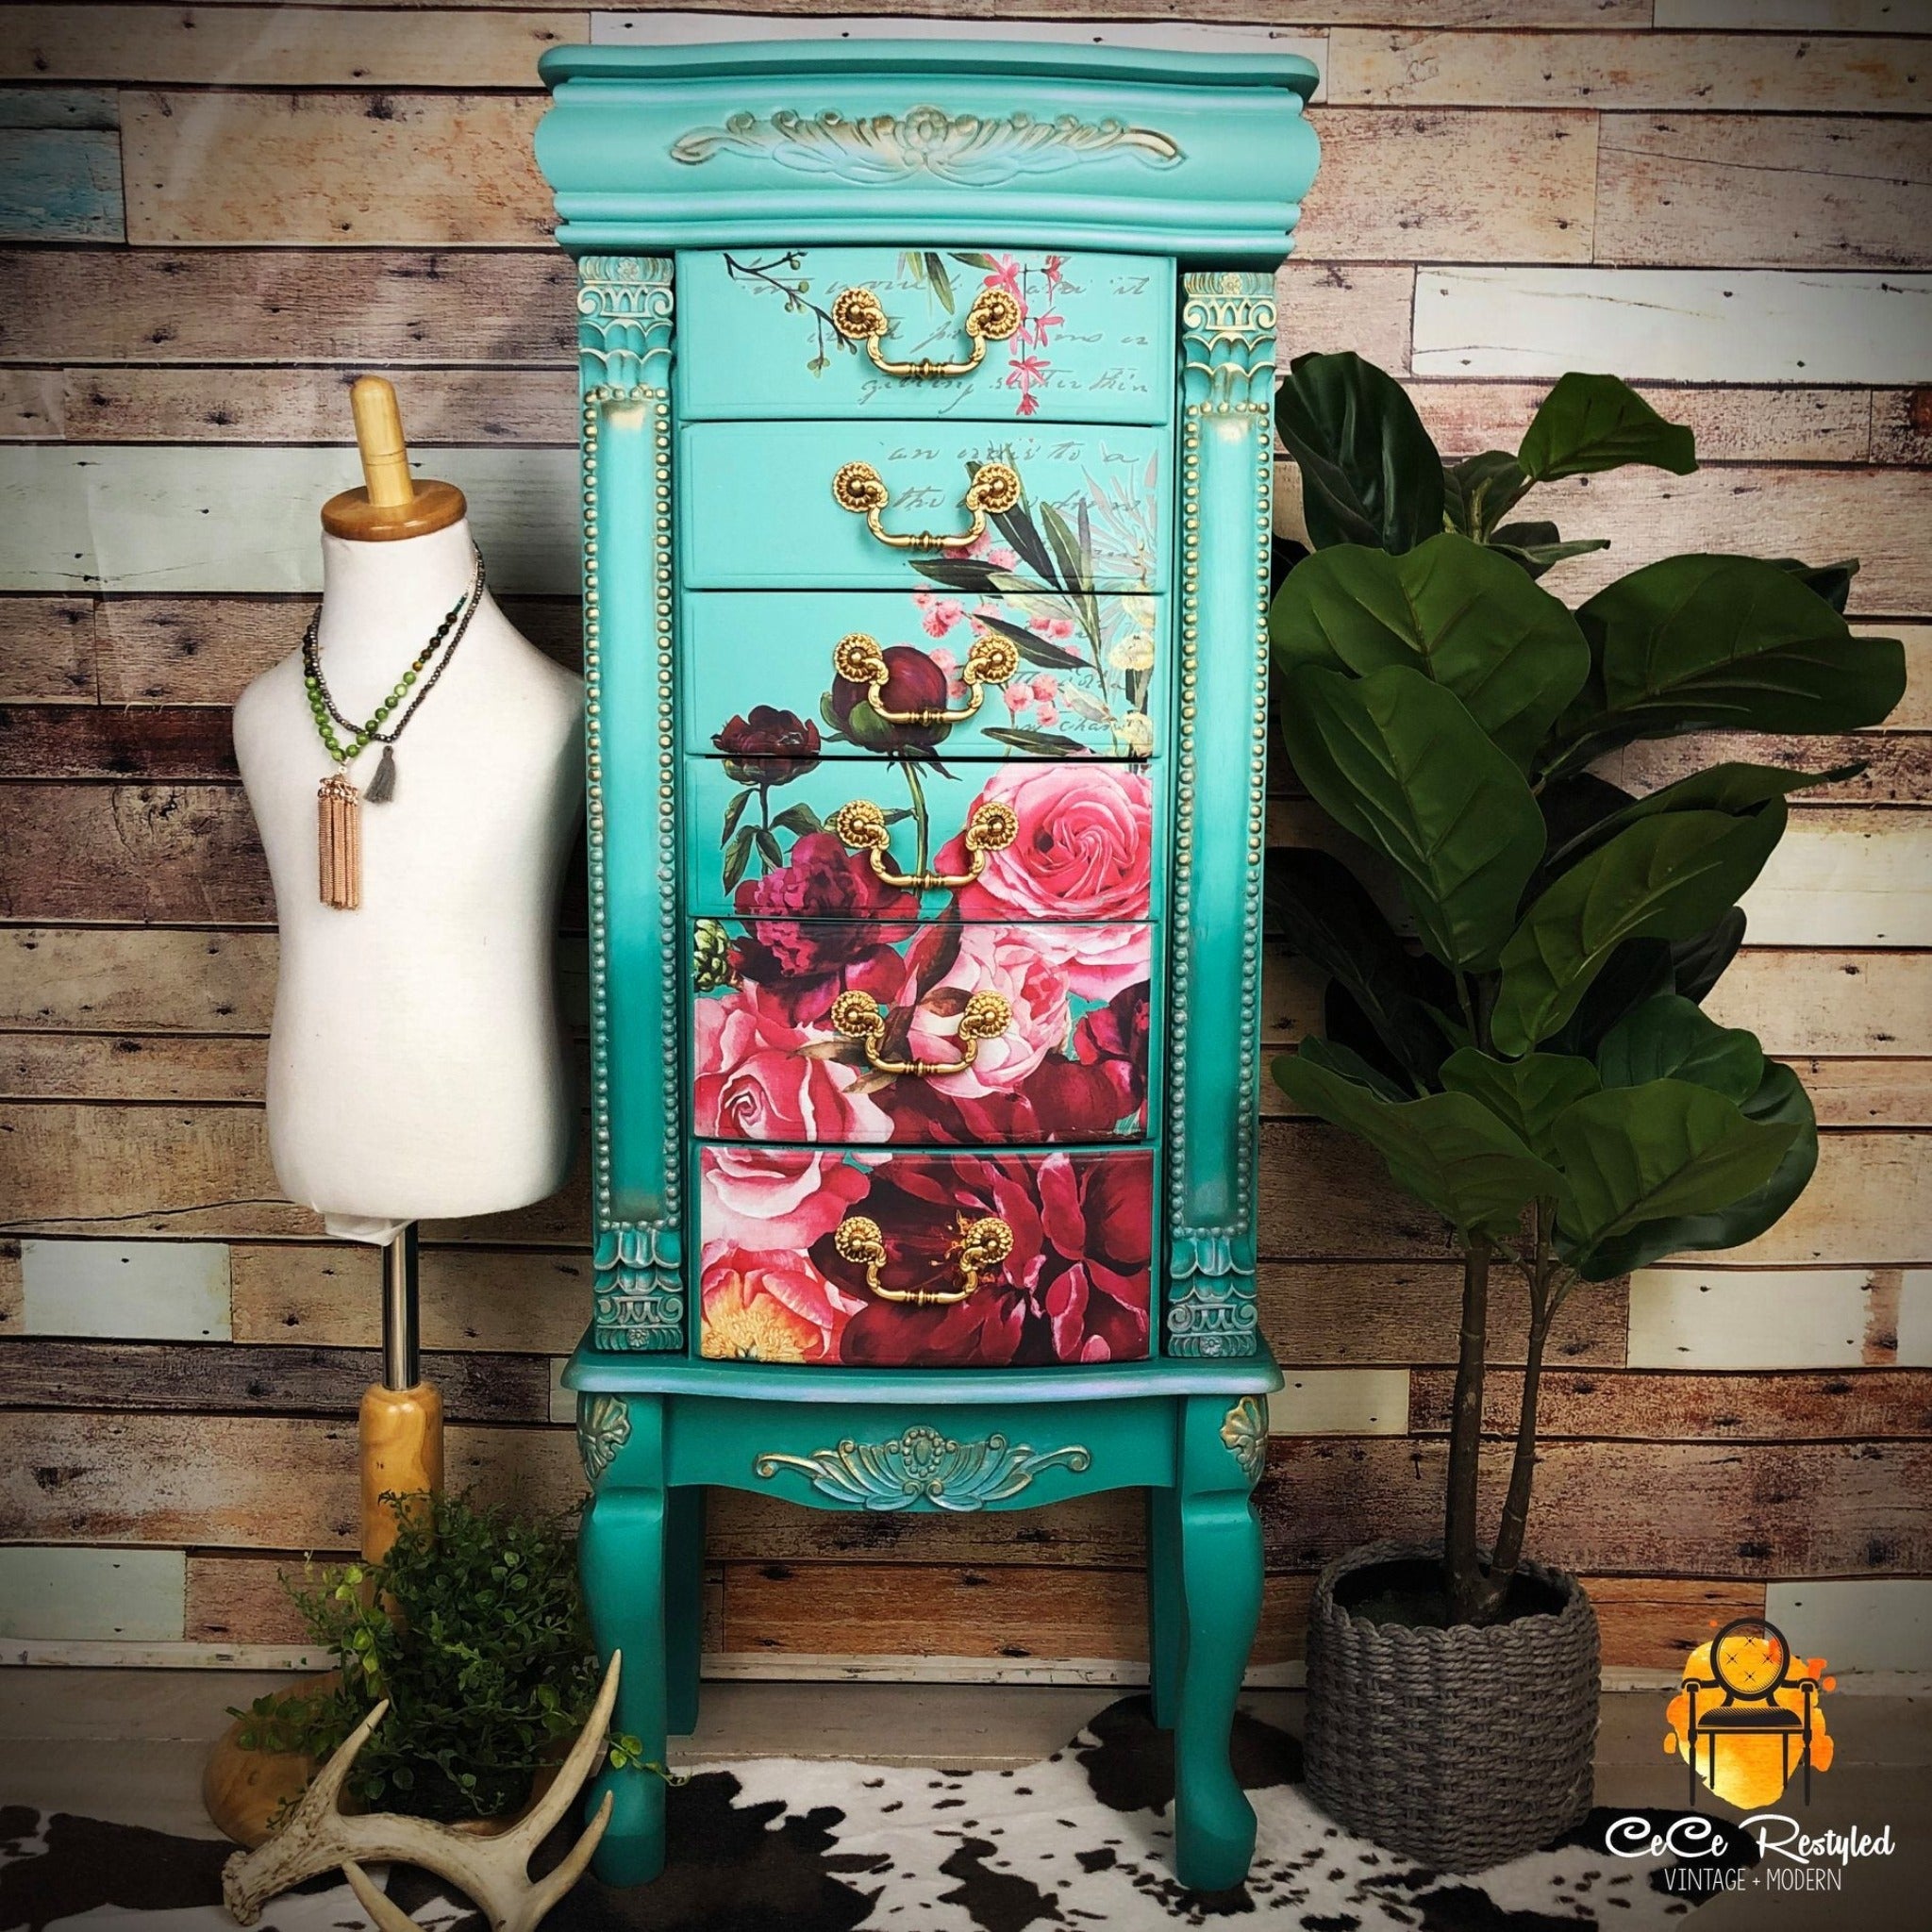 A vintage standing jewelry armoire refurbished by CeCe ReStyled is painted an ombre of light teal down to dark teal with gold accents and features ReDesign with Prima's Royal Burgundy transfer on its front drawers.